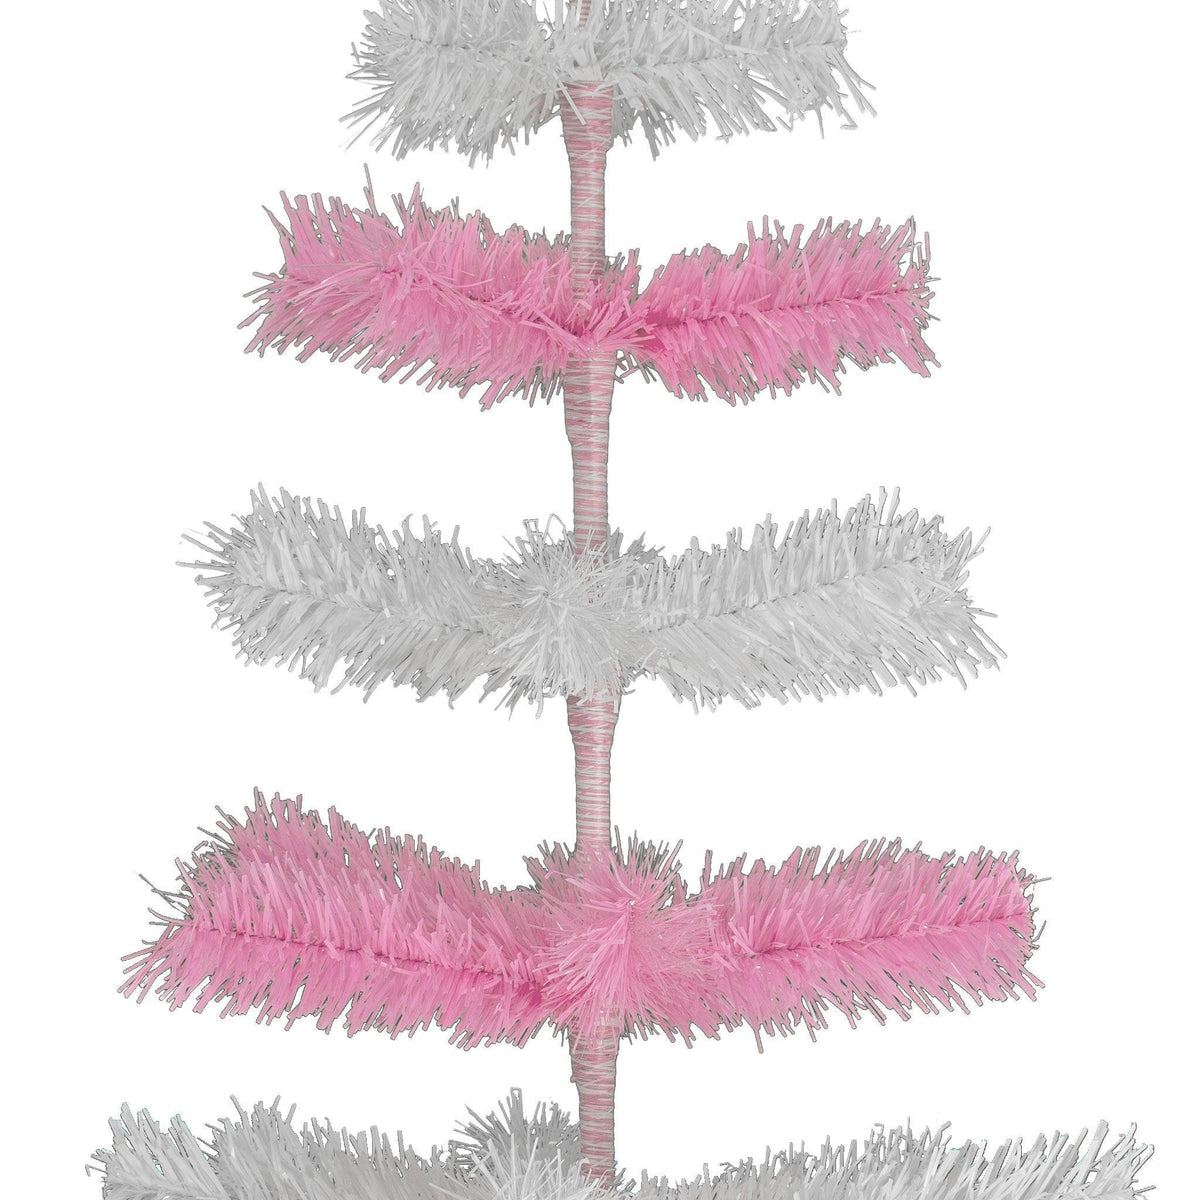 Pink & White Layered Tinsel Christmas Trees!    Decorate for the holidays with a Shiny Pink and Matte White retro-style Christmas Tree.  Incorporate a little purple and white into your holiday decorations this year. On sale at leedisplay.com